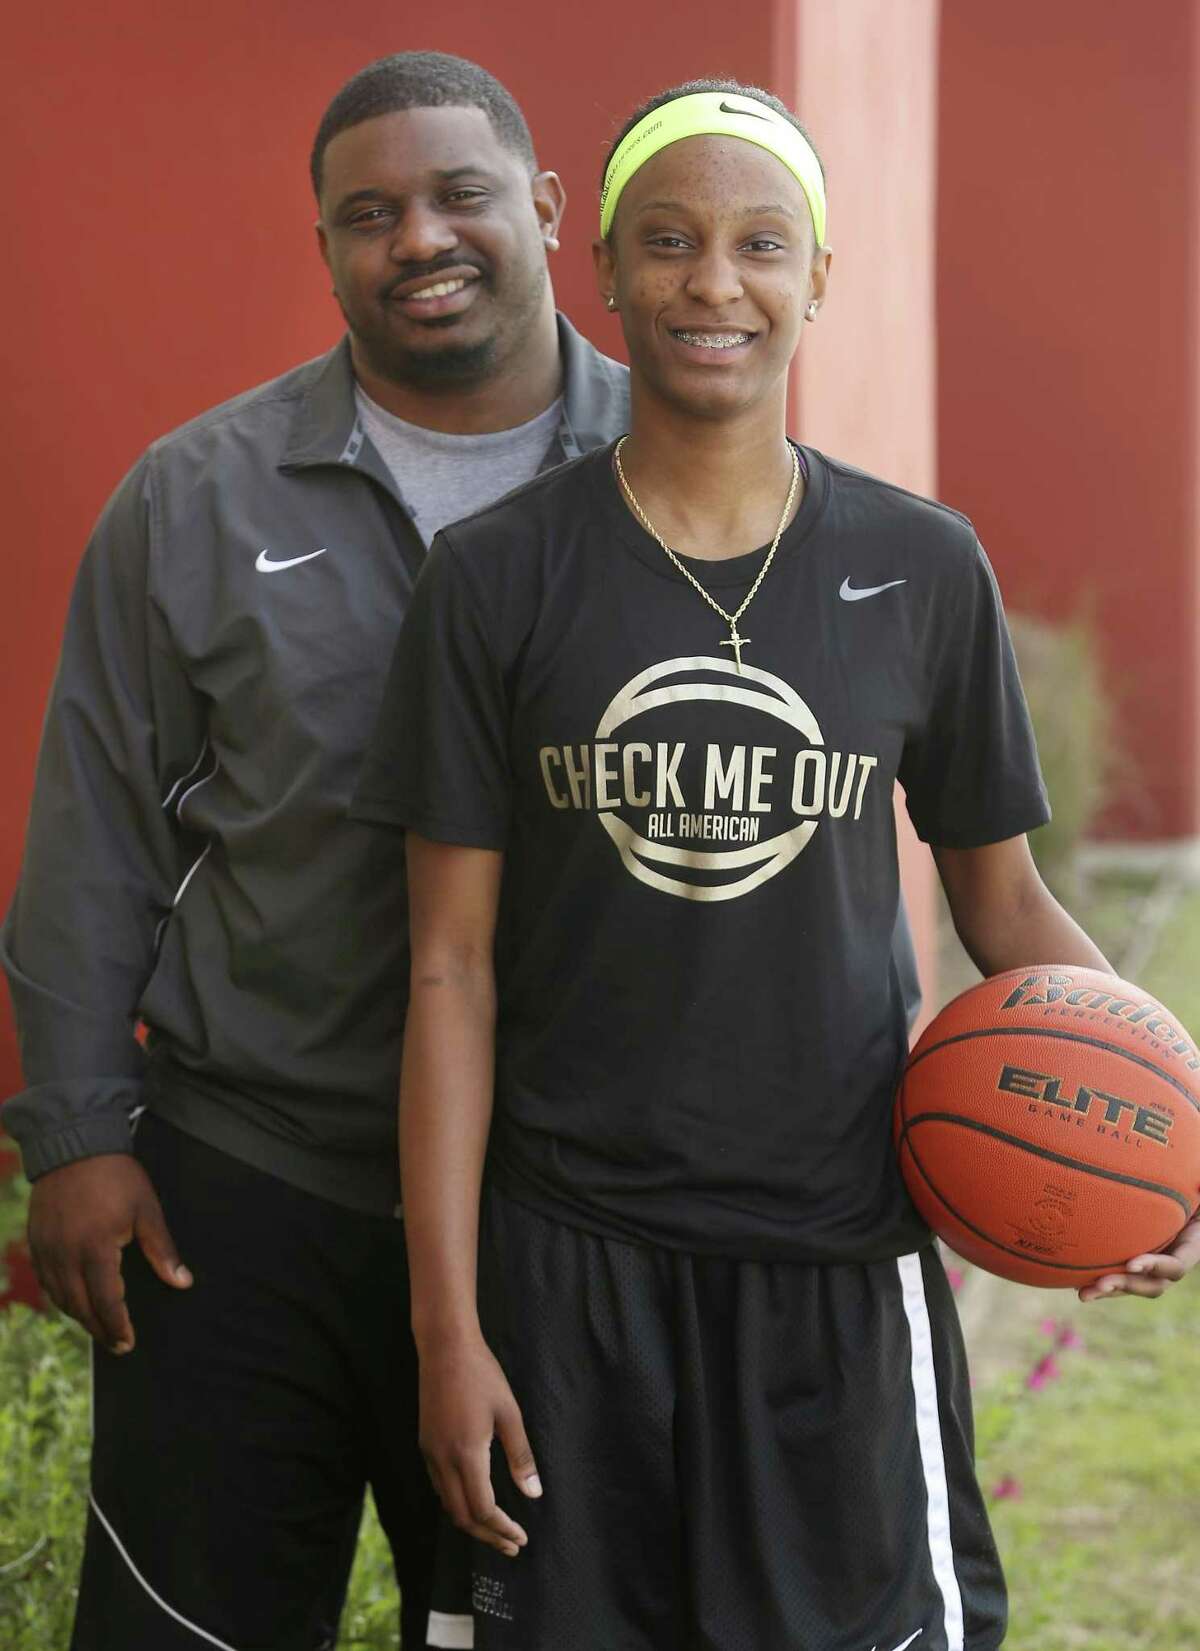 Wagner senior Kiana Williams and her half brother, Chancy Campbell, pose together on March 15, 2017. Williams, a Stanford signee, has been selected to play in the prestigious McDonald’s All-American Game on March 29 in Chicago.